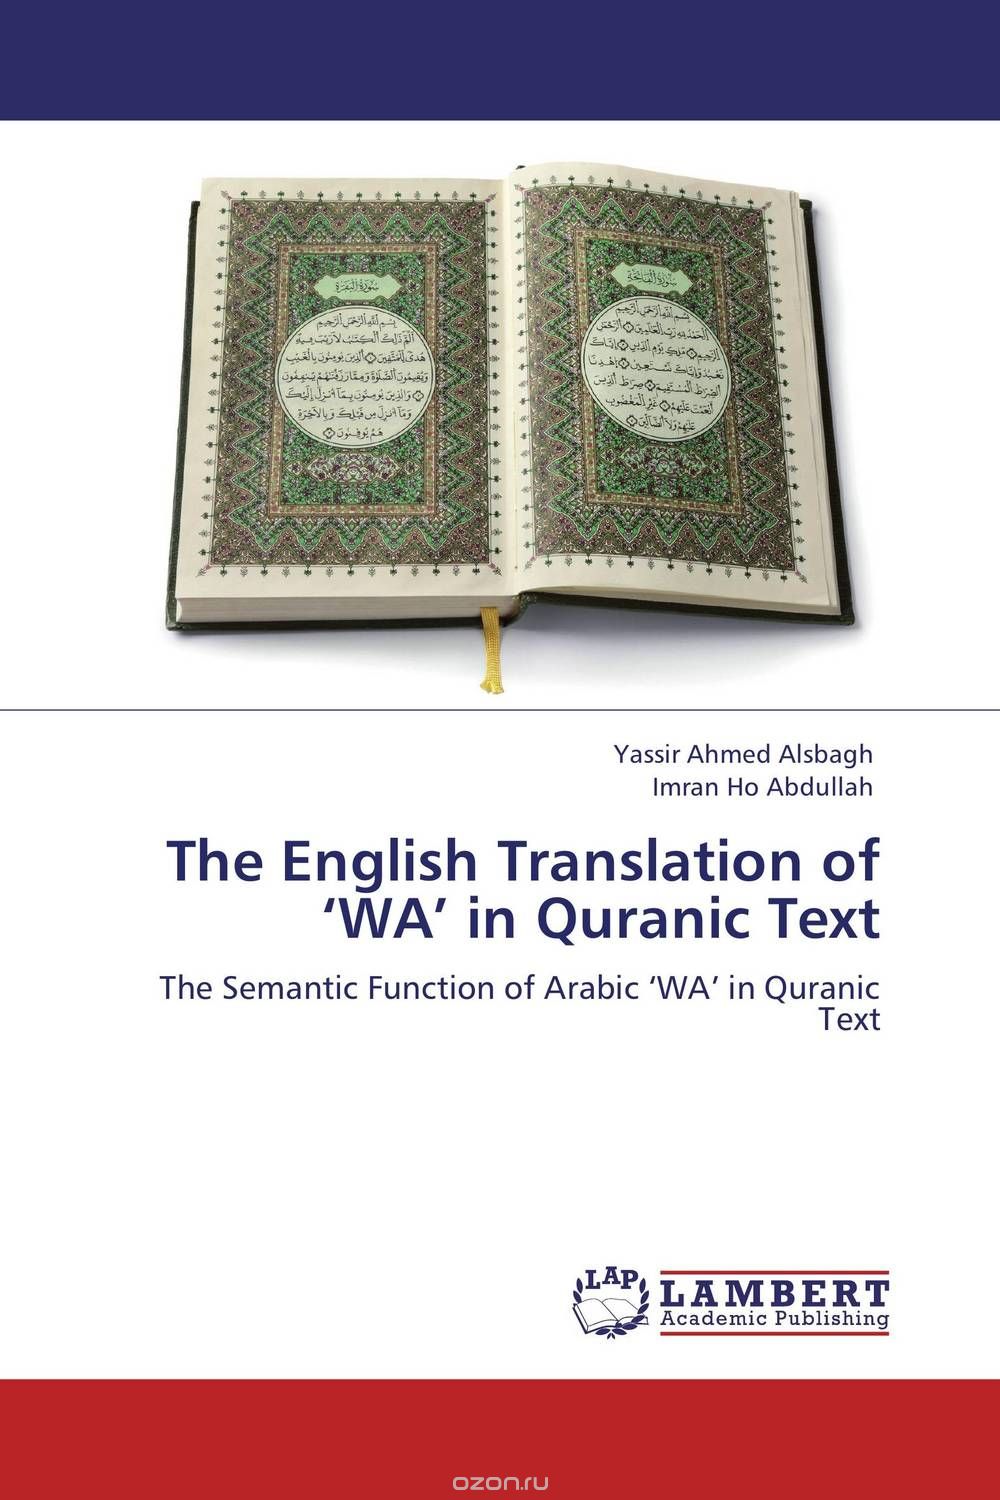 The English Translation of ‘WA’ in Quranic Text